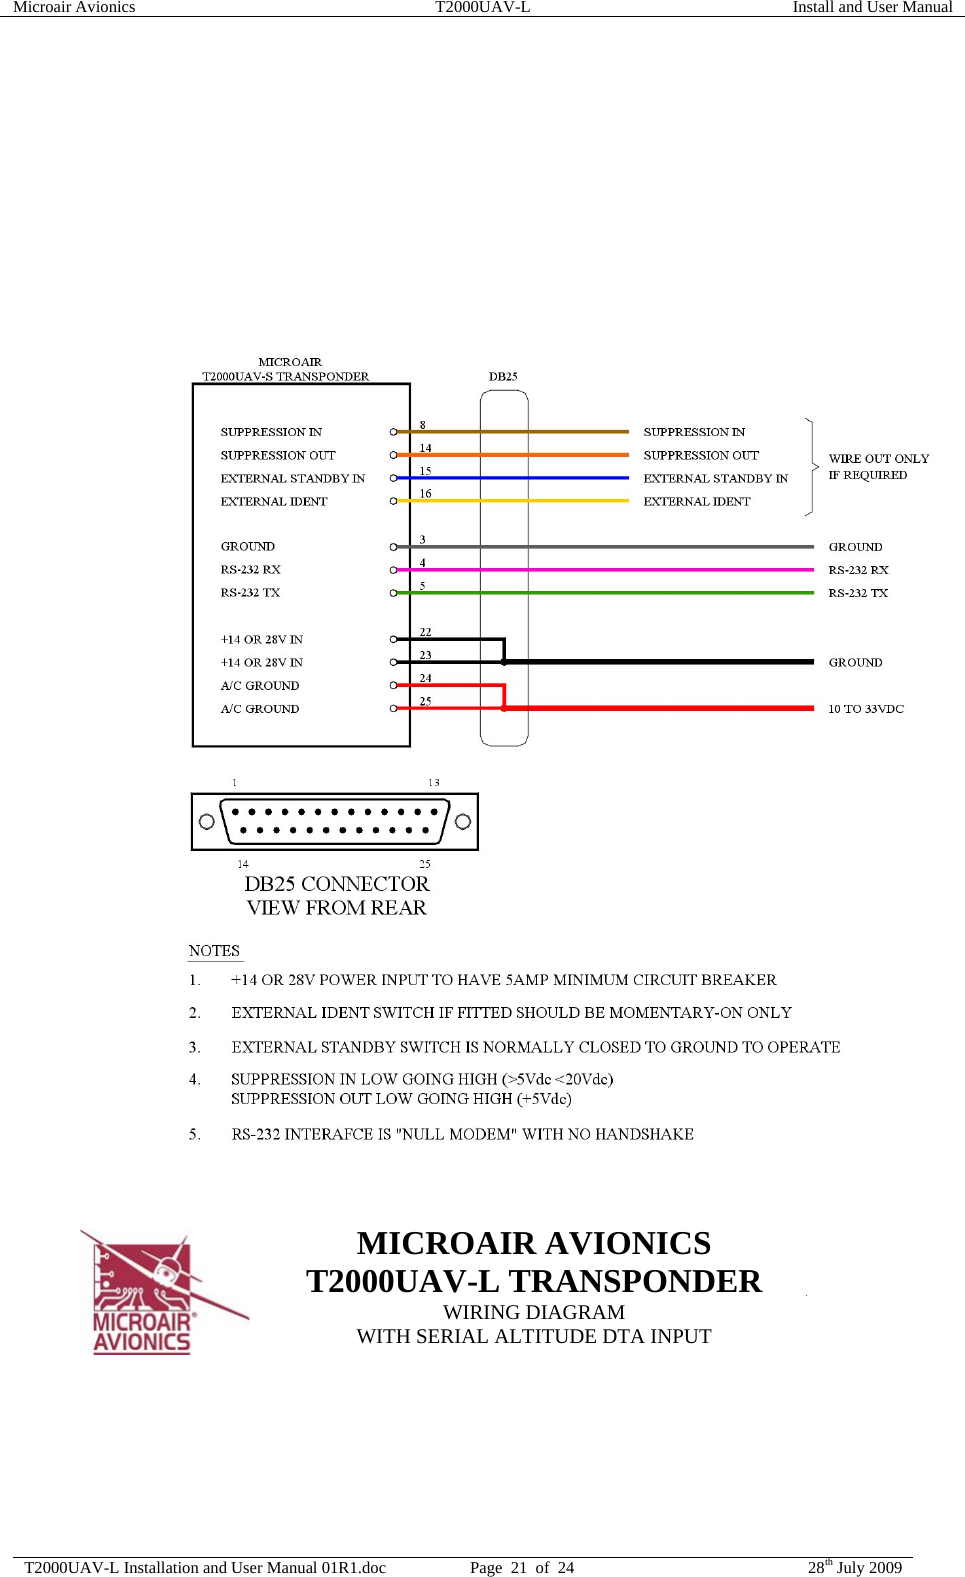 Microair Avionics  T2000UAV-L  Install and User Manual  T2000UAV-L Installation and User Manual 01R1.doc  Page  21  of  24  28th July 2009        MICROAIR AVIONICS T2000UAV-L TRANSPONDER WIRING DIAGRAM WITH SERIAL ALTITUDE DTA INPUT 